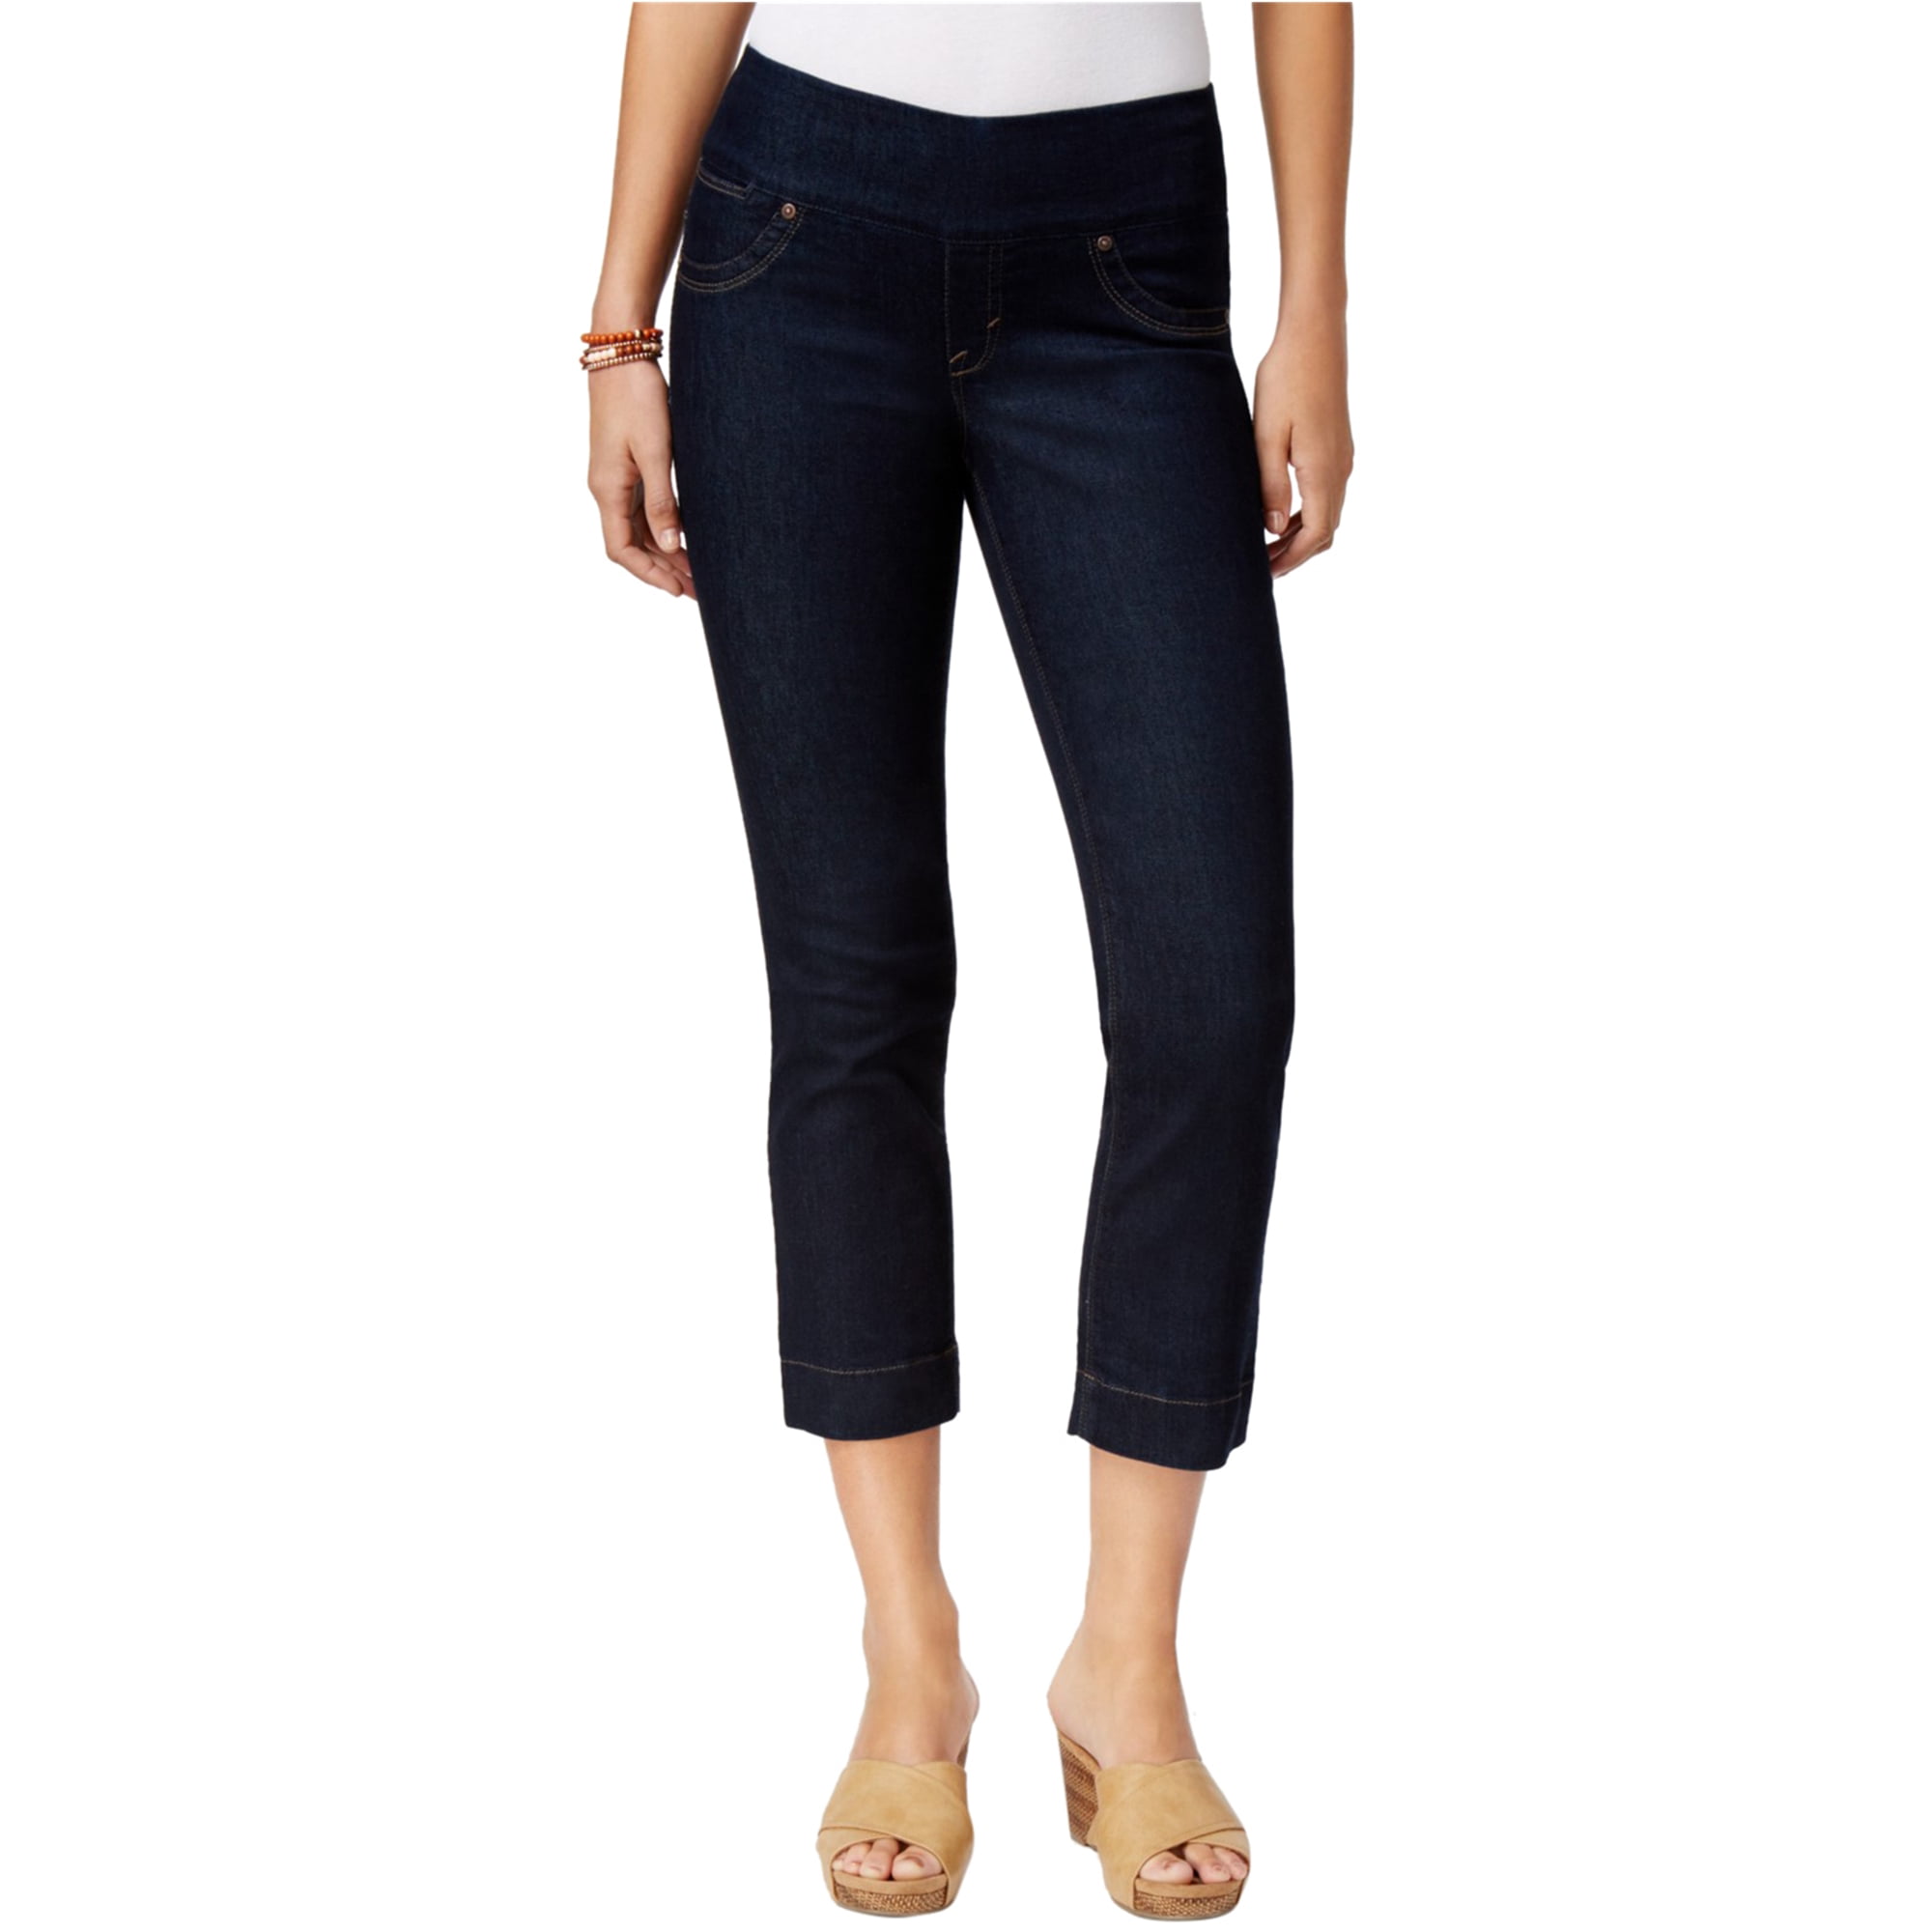 Style & Co Women's Tummy-Control Bootcut Rinse Jeans Msrp$49.00 